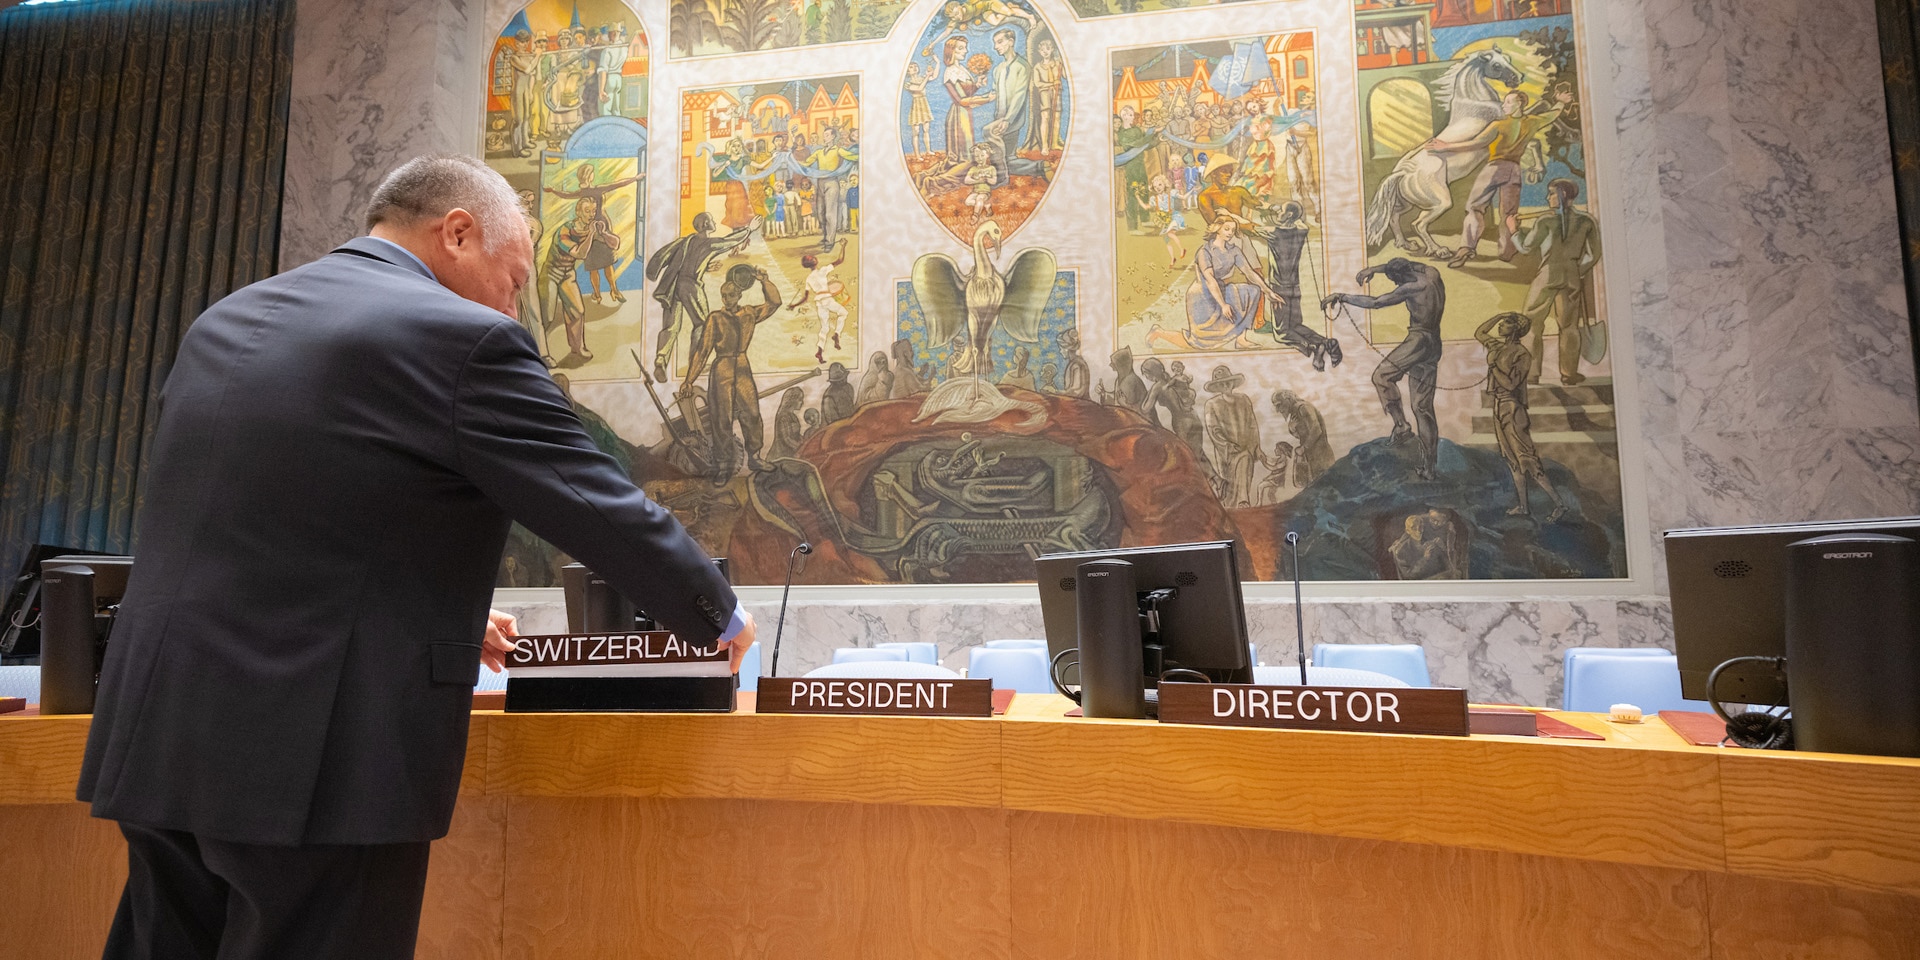 A UN official placing a sign reading 'Switzerland' in the president's place at the horseshoe-shaped table of the UN Security Council.